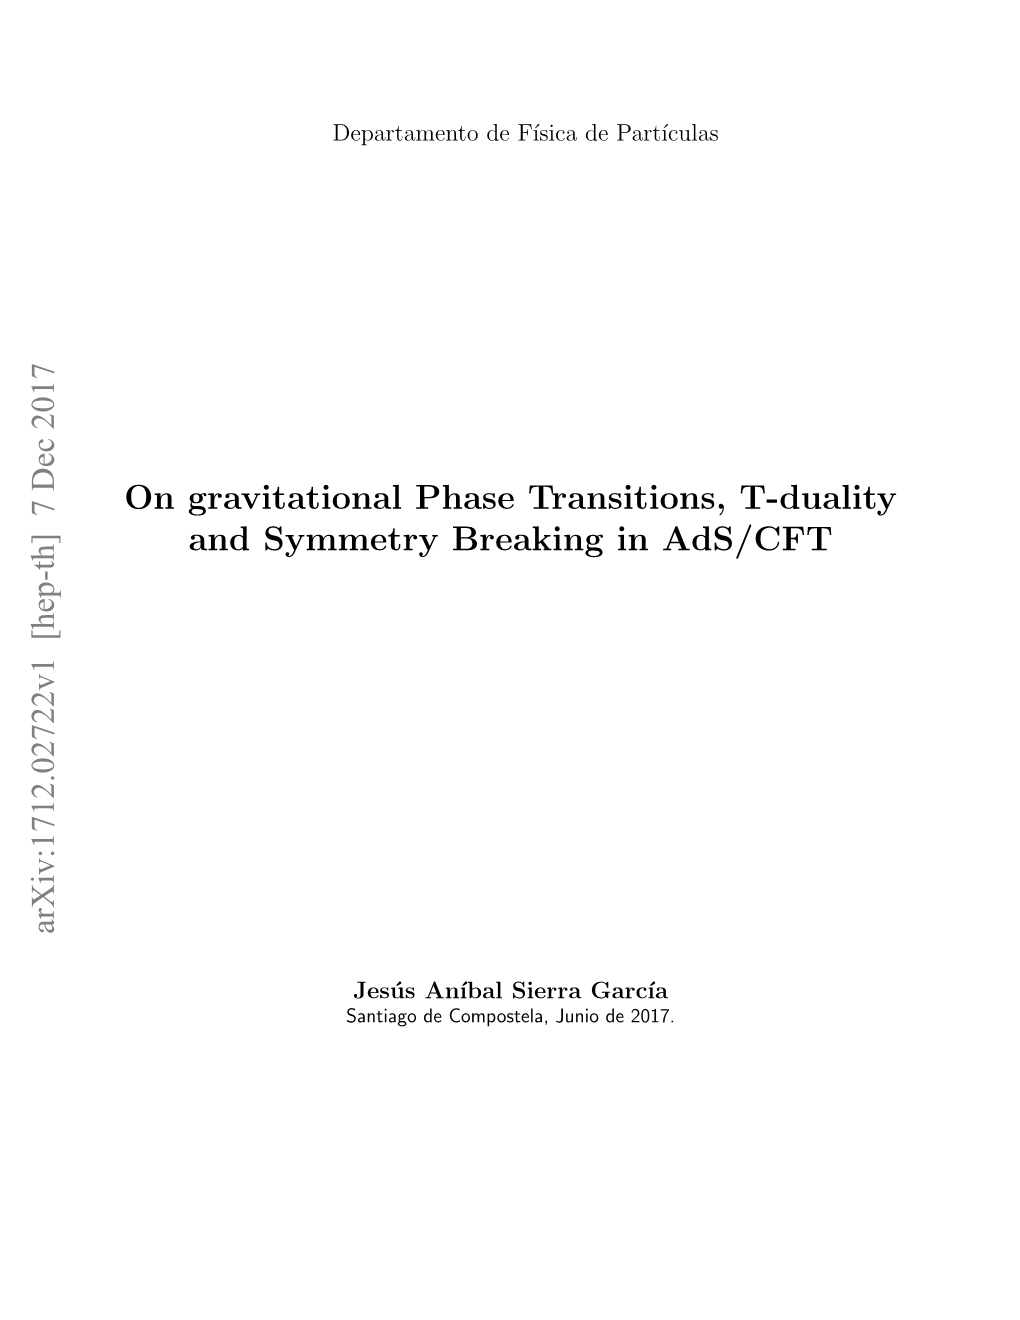 On Gravitational Phase Transitions, T-Duality and Symmetry Breaking in Ads/CFT Arxiv:1712.02722V1 [Hep-Th] 7 Dec 2017